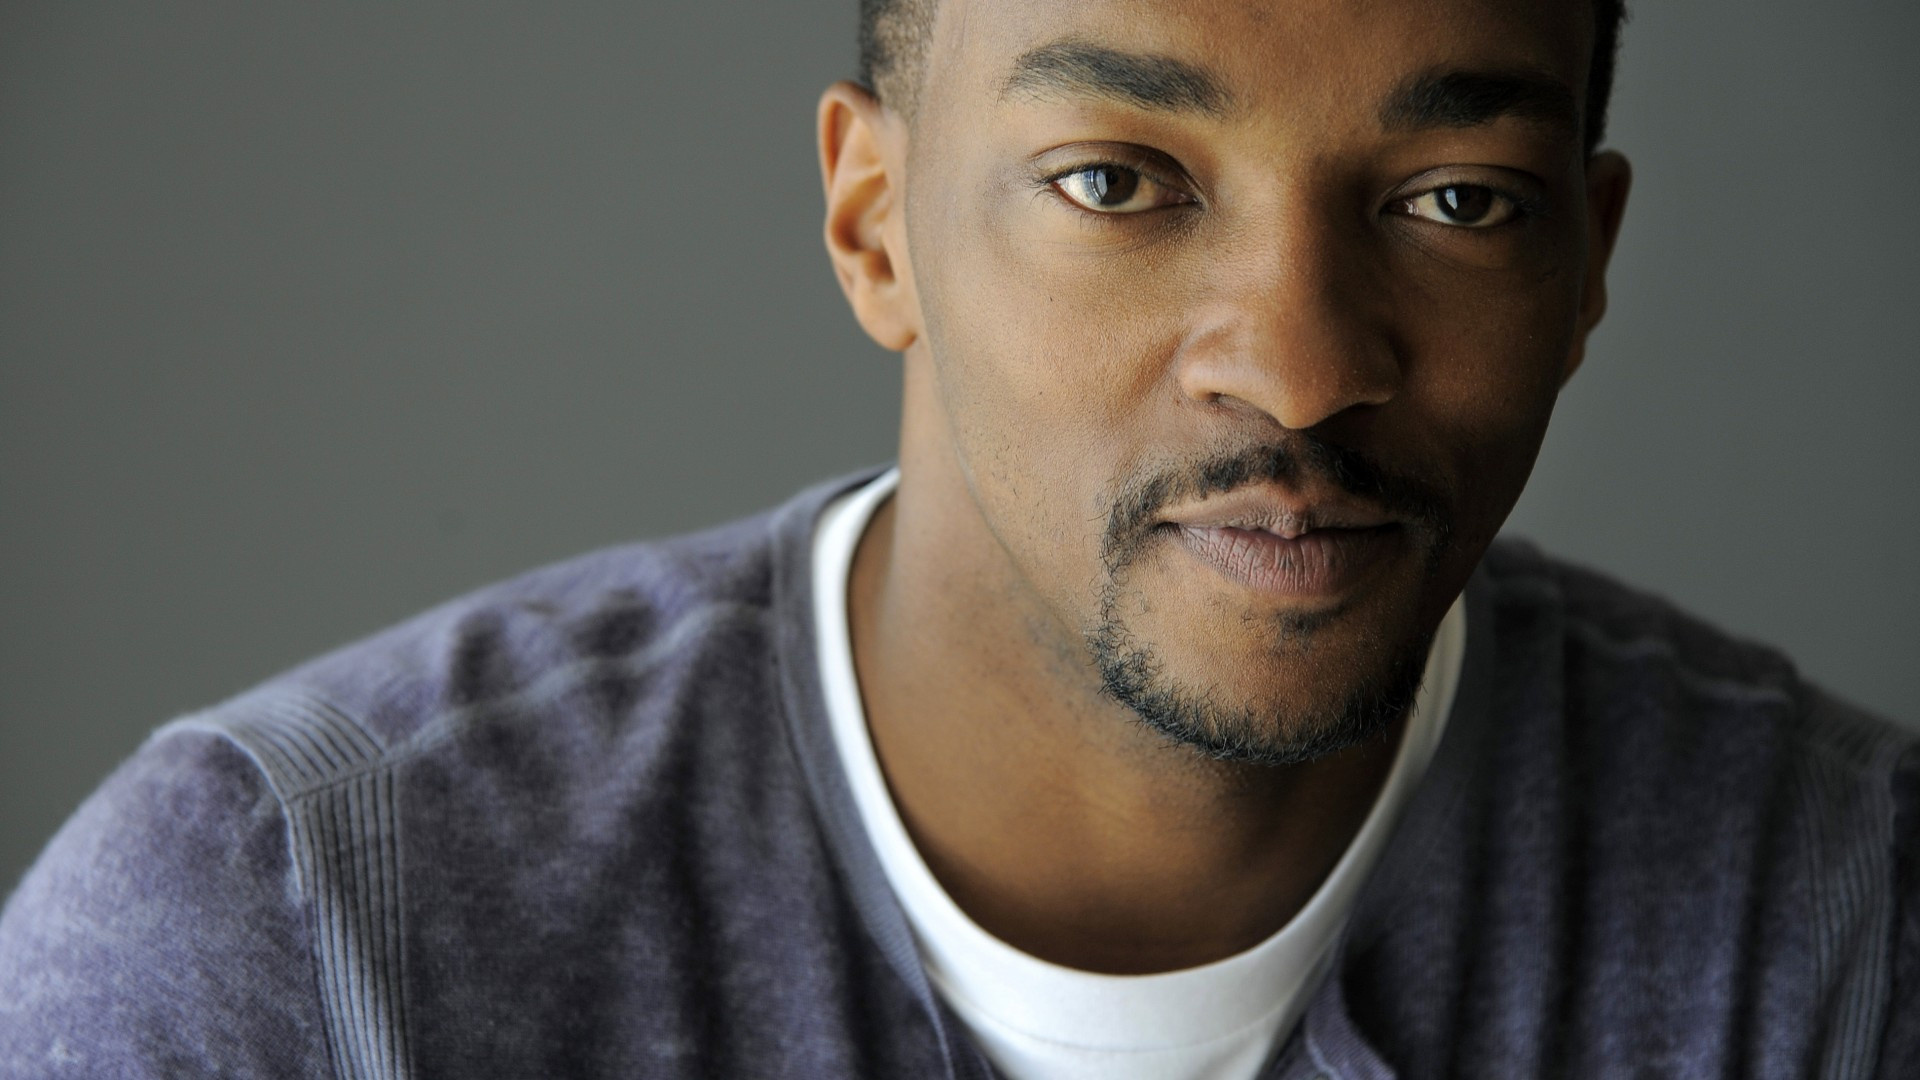 Anthony Mackie, actor face portrait wallpapers, 1920x1080 Full HD Desktop